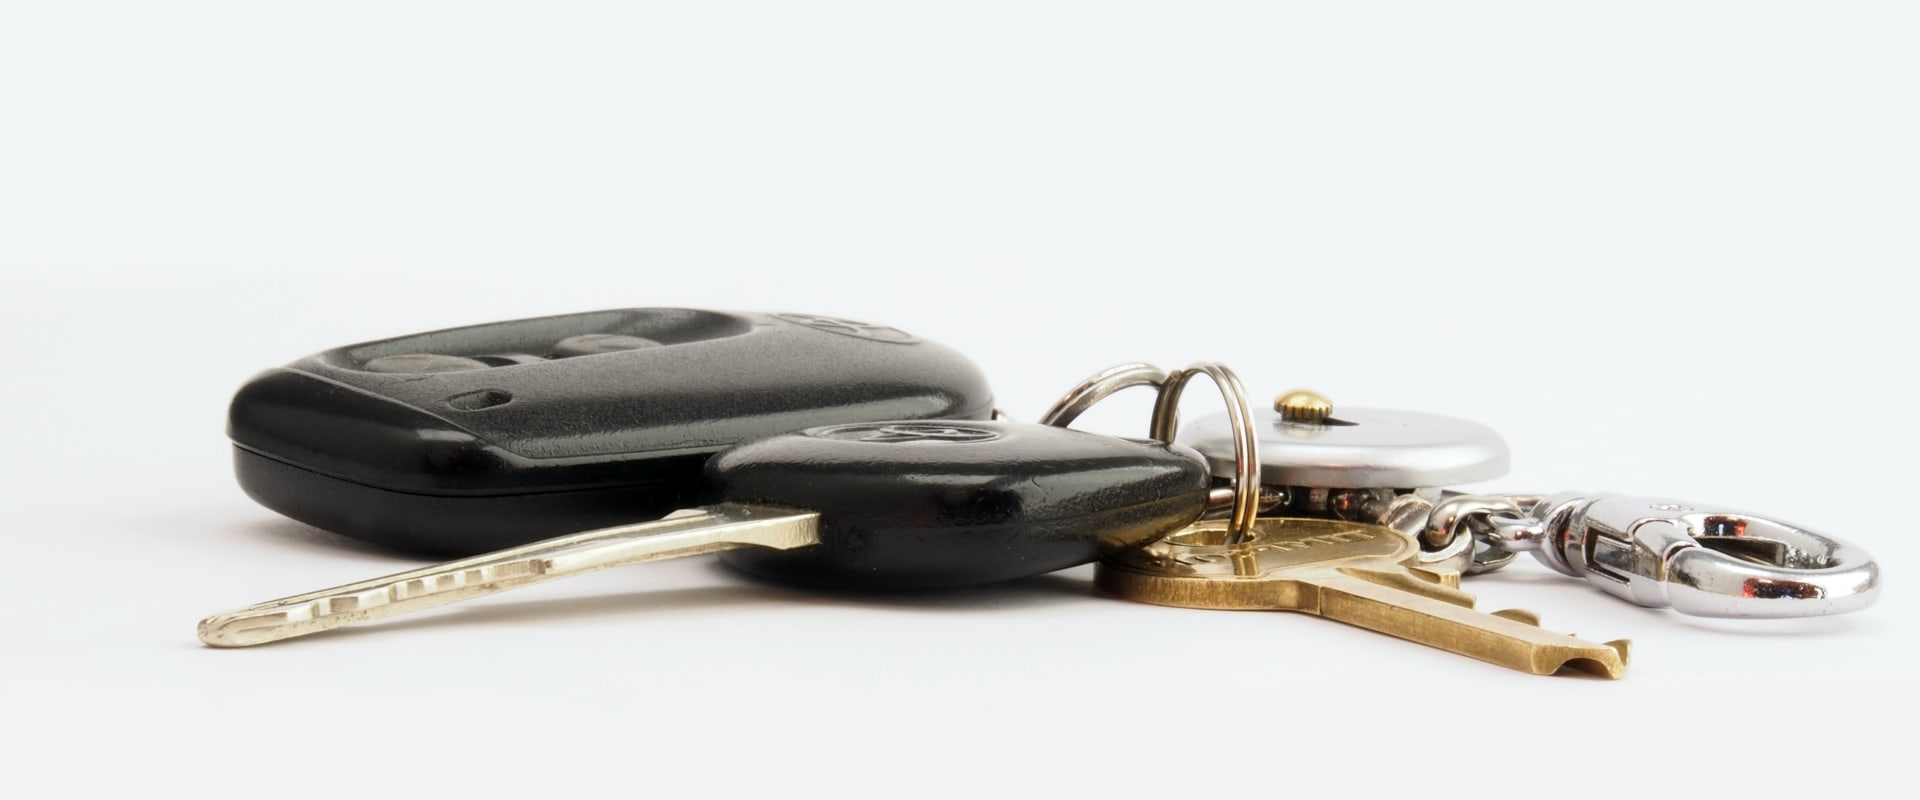 Discounts for Car Key Replacement in Spokane